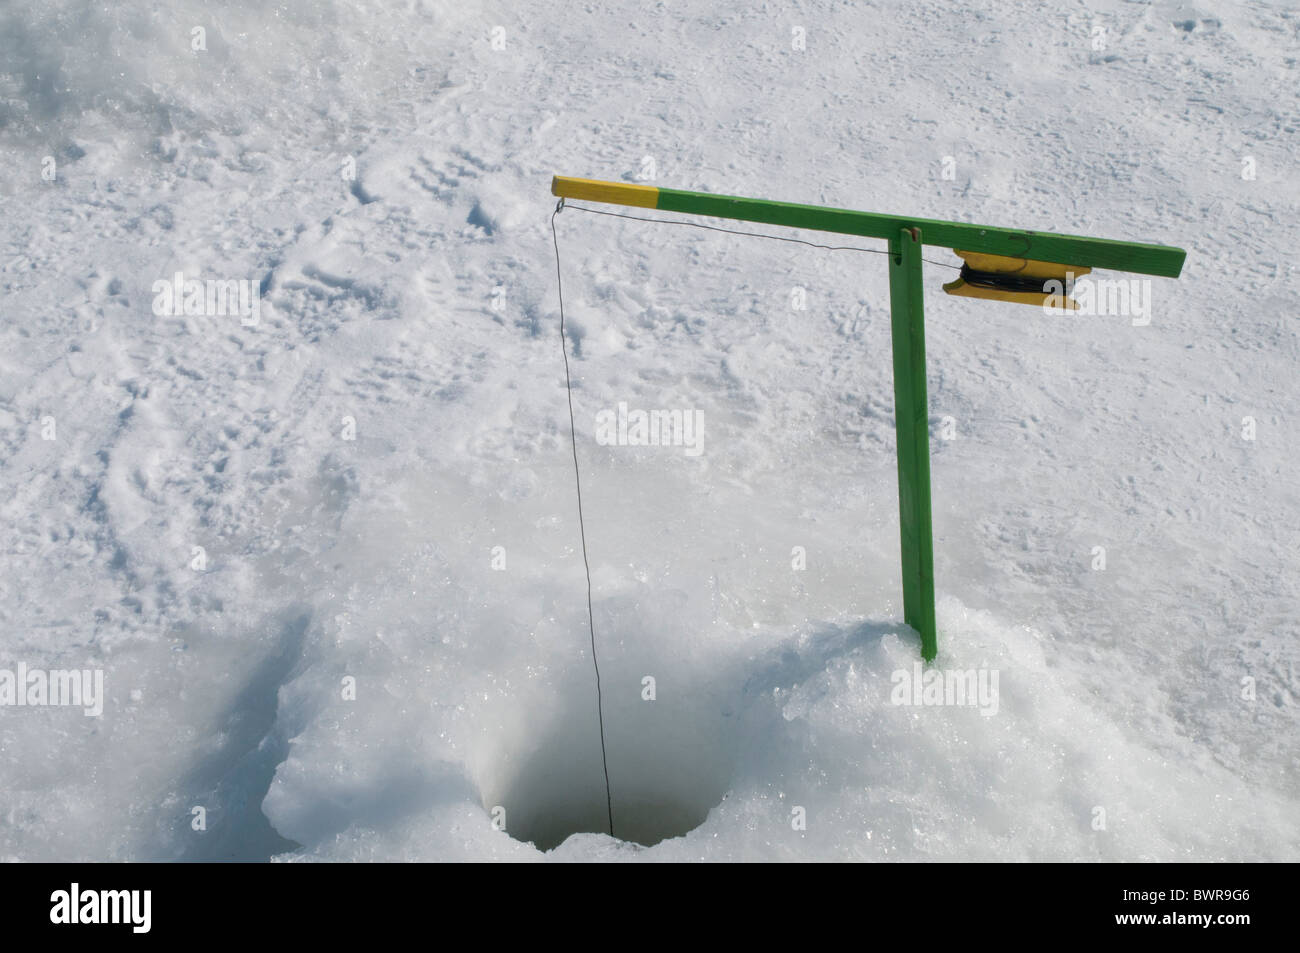 Ice fishing in Quebec, Canada - the rod and bait is all set up to catch fish  in a dugout of a frozen river bed Stock Photo - Alamy